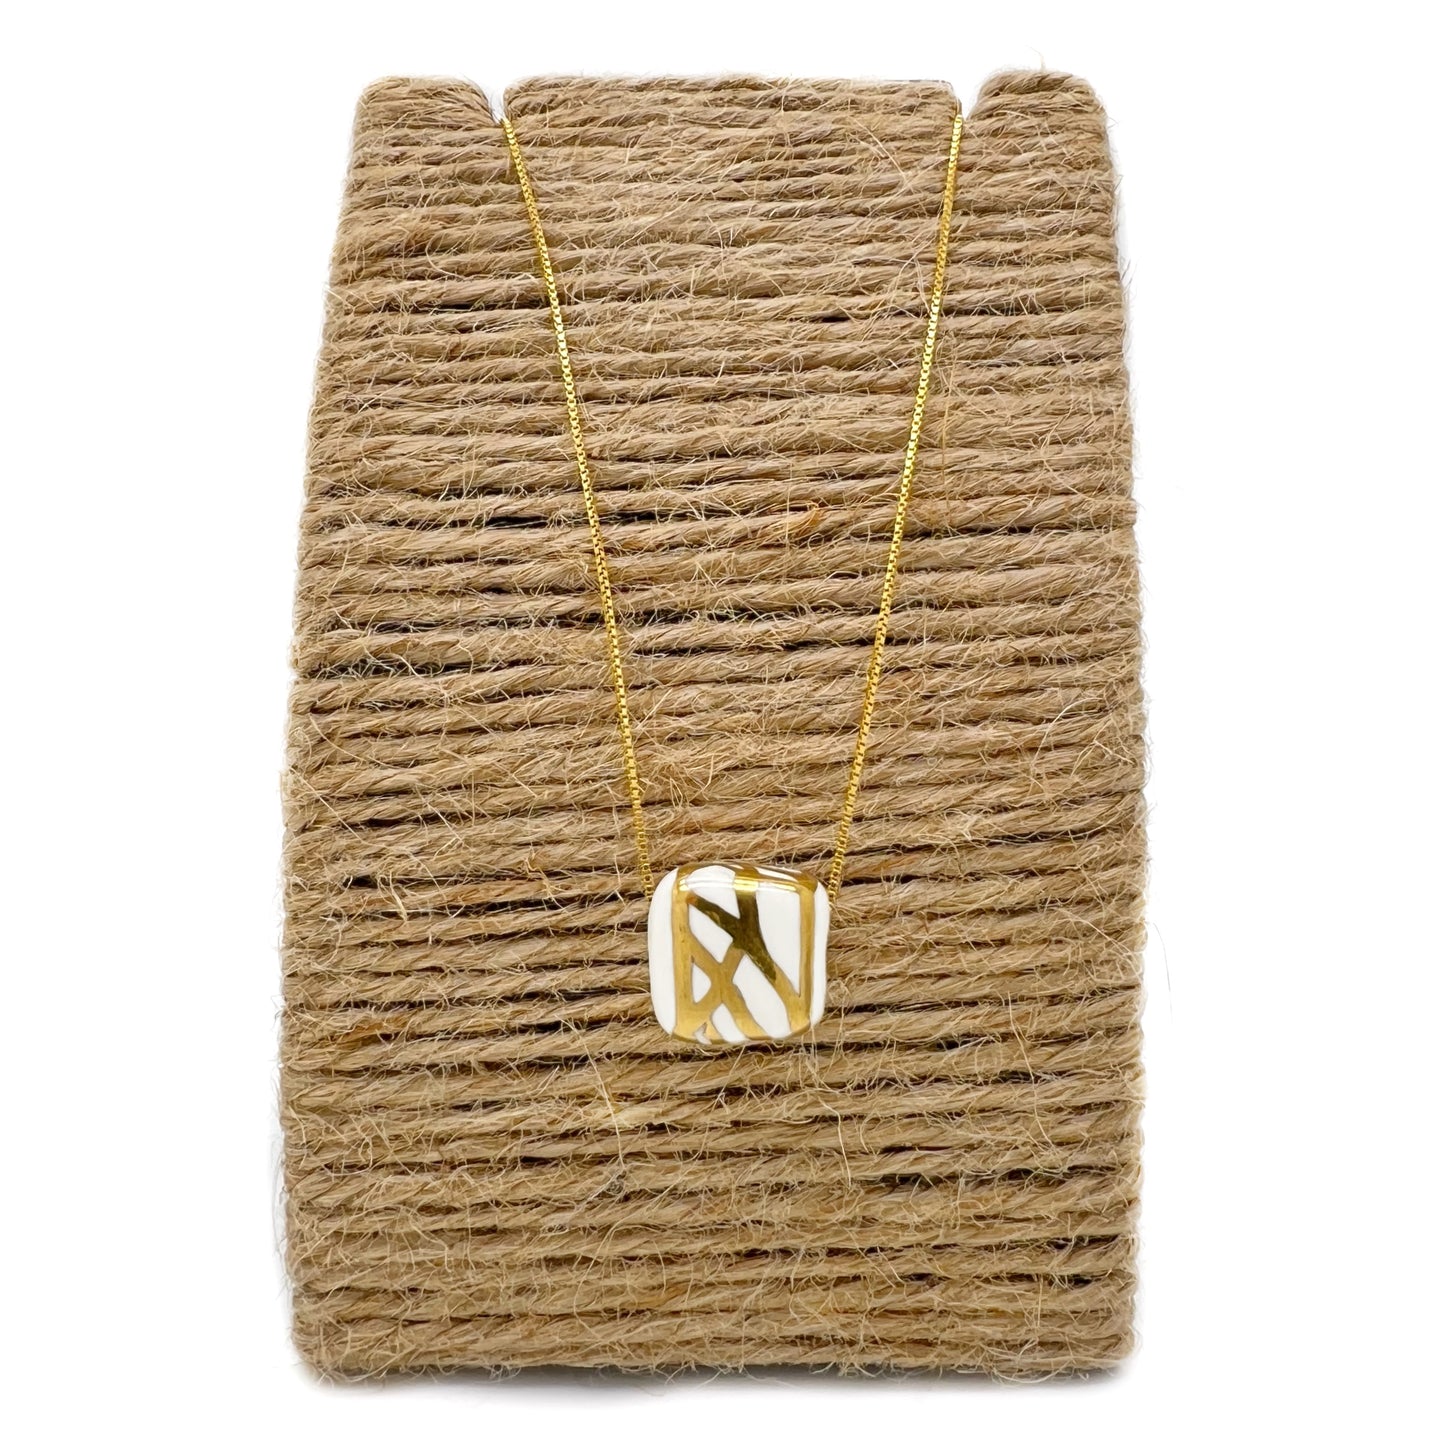 Ceramic pendant with white and gold abstract decoration